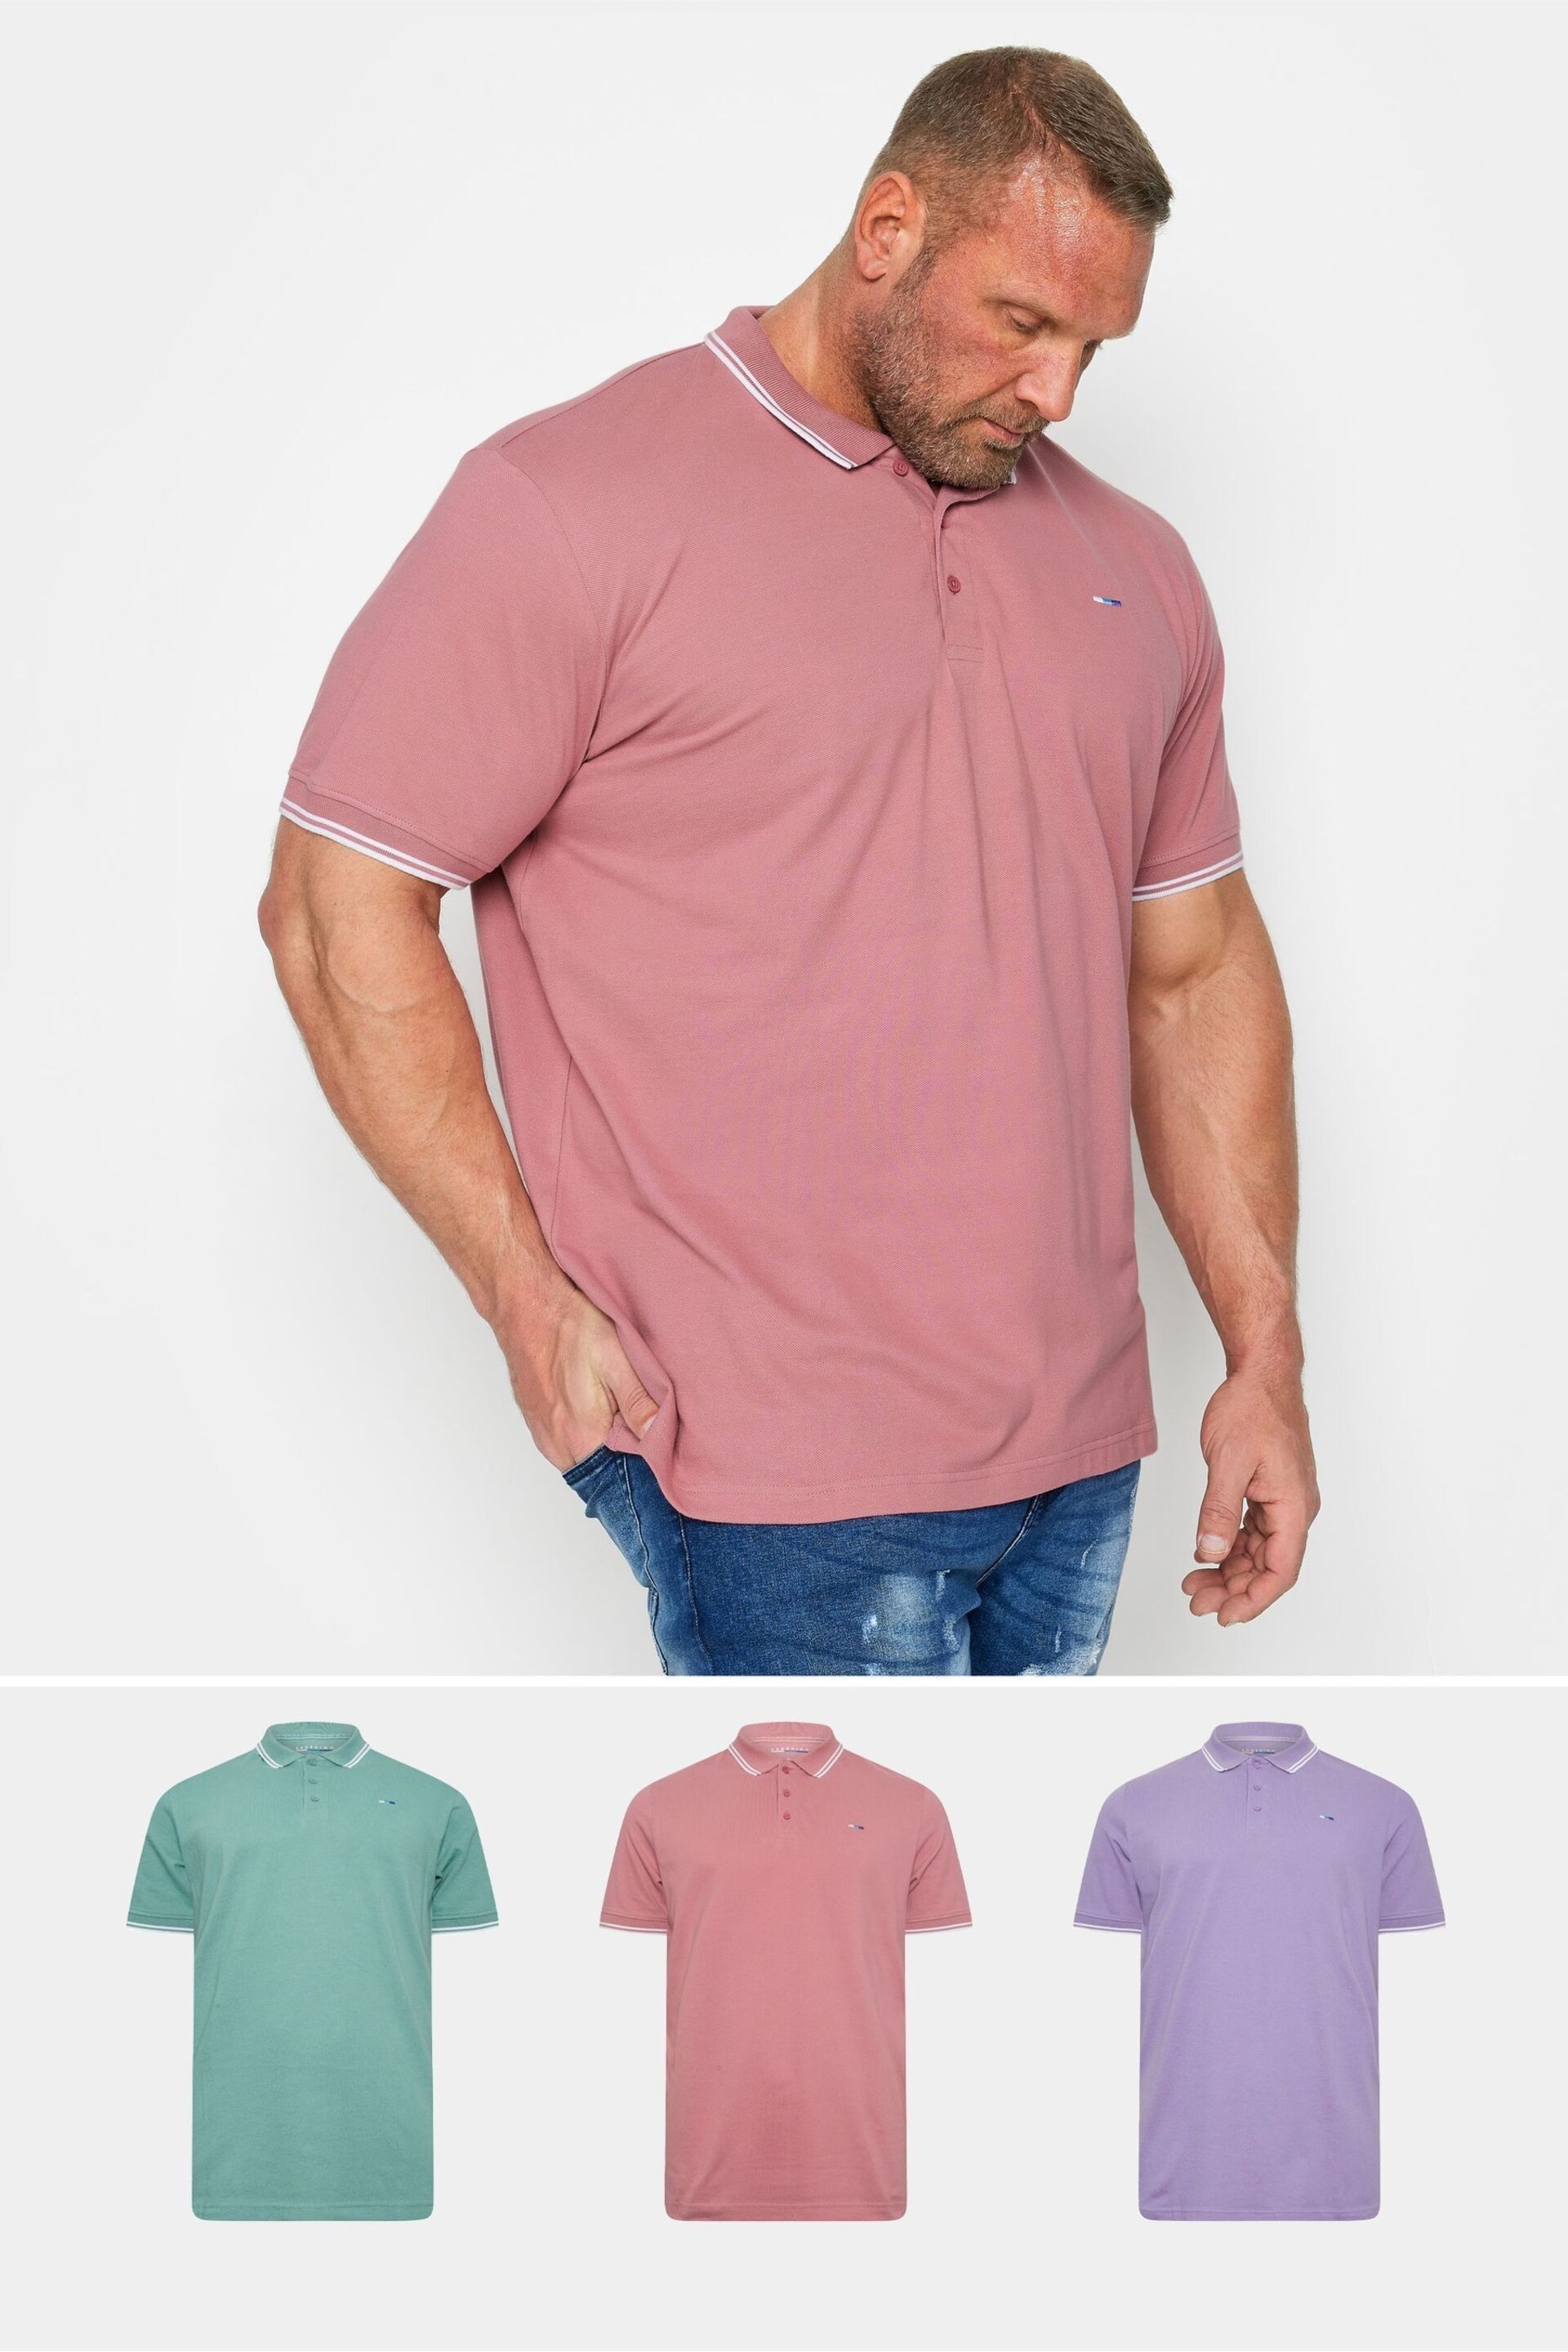 BadRhino Big & Tall Mineral Blue/Rose Pink/Violet Purple 3 Pack Tipped Polo Shirts - Image 1 of 7